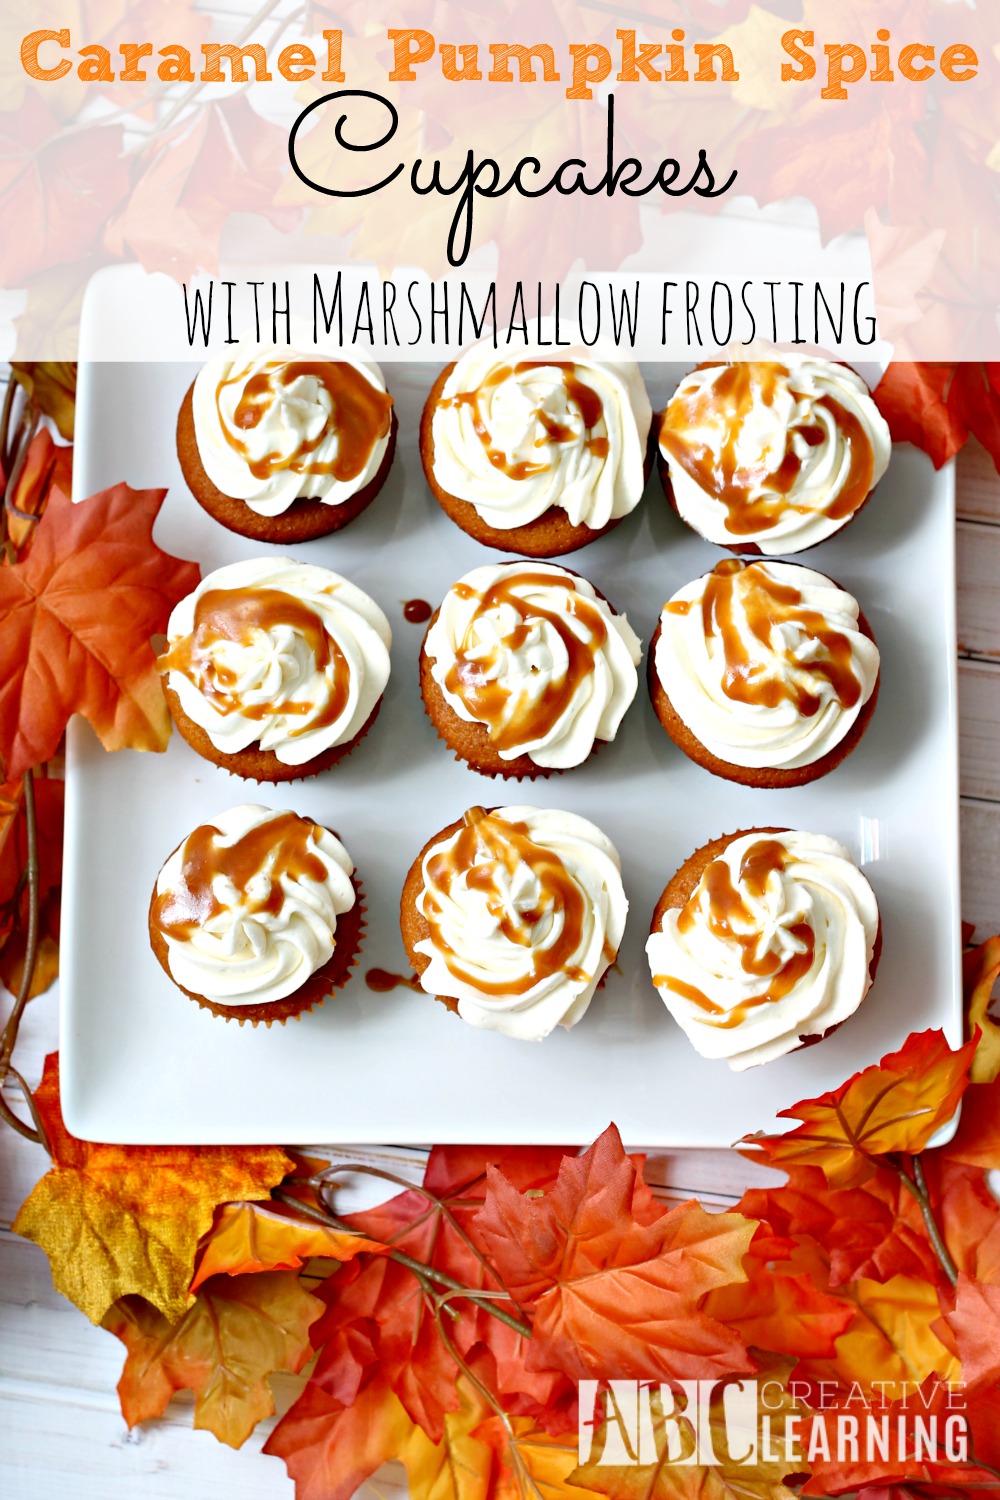 Caramel Pumpkin Spice Cupcakes with Marshmallow Frosting falls